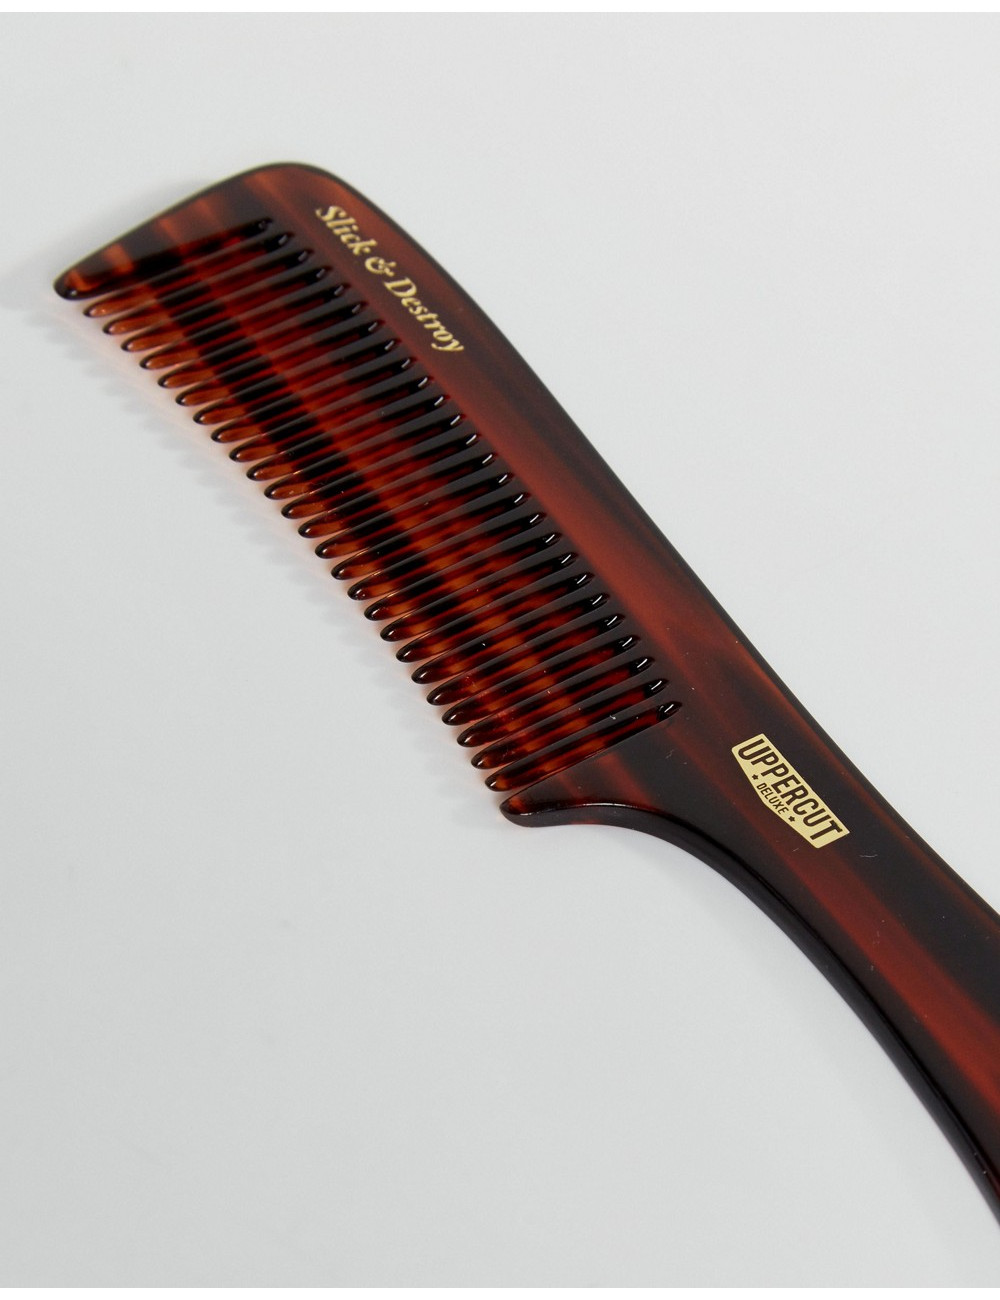 Uppercut Deluxe Styling Comb